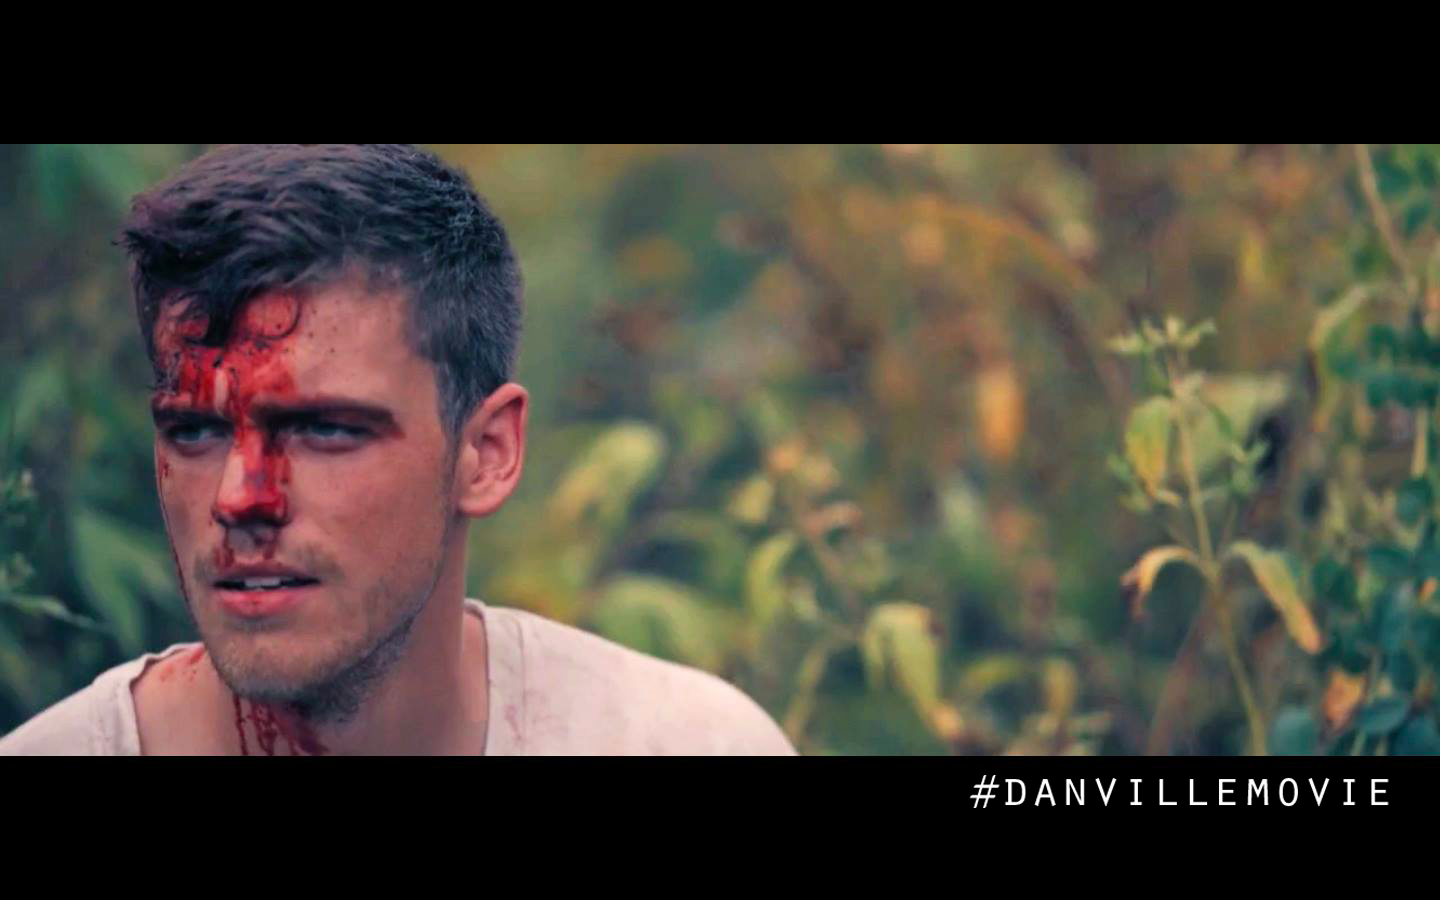 Darcy Grey as 'Daniel Malinack' in the feature film 'What Happened in Danville (2016)'